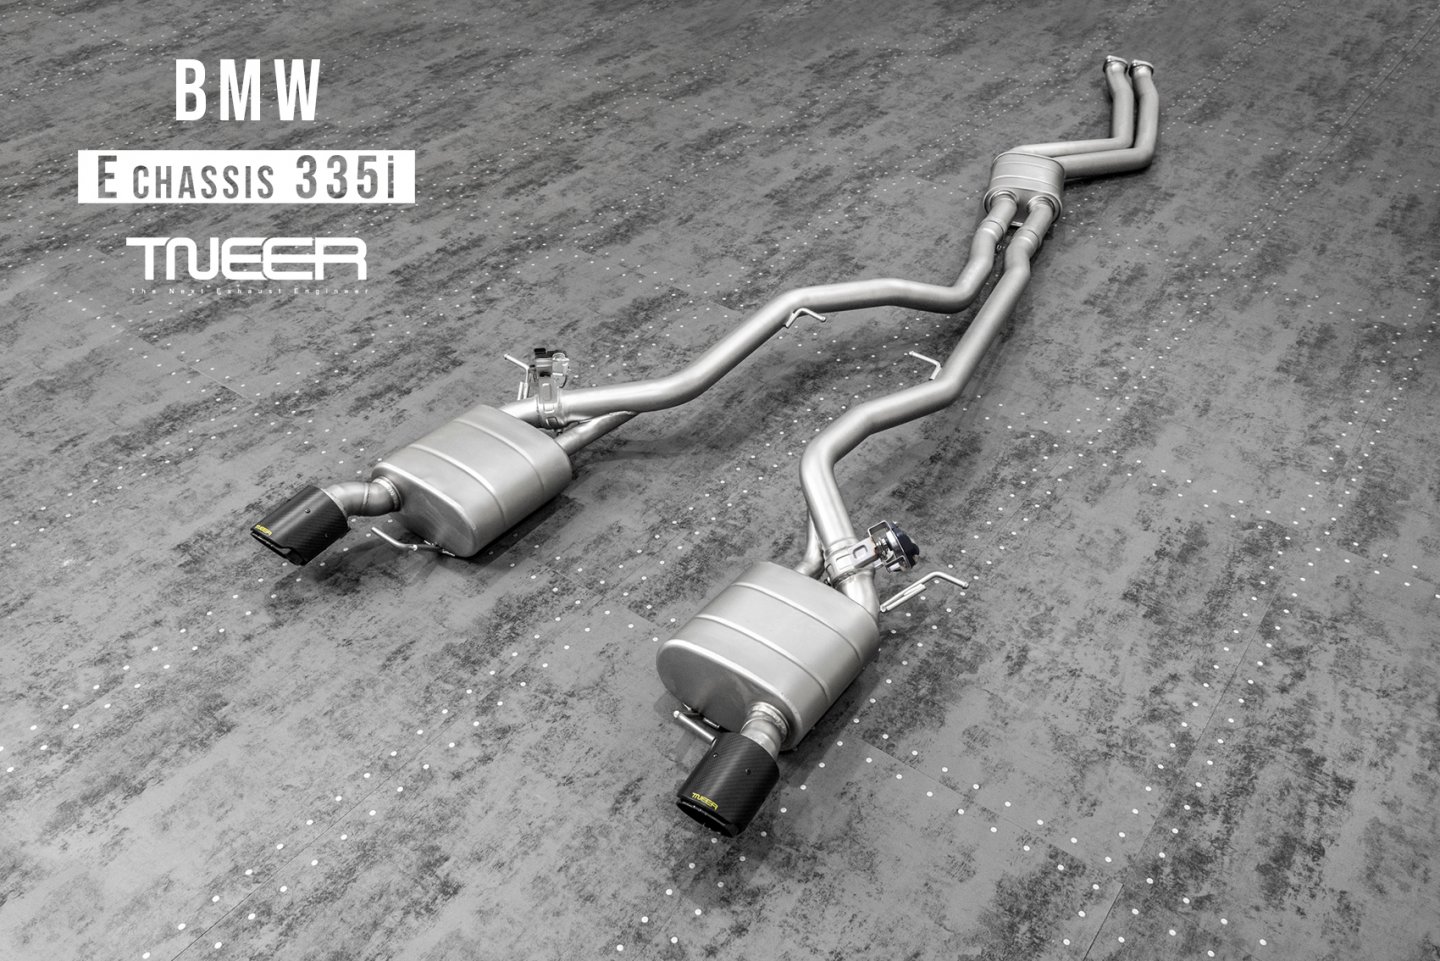 Audi A4/A5(B9) 2.0T TNEER Performance Exhaust System